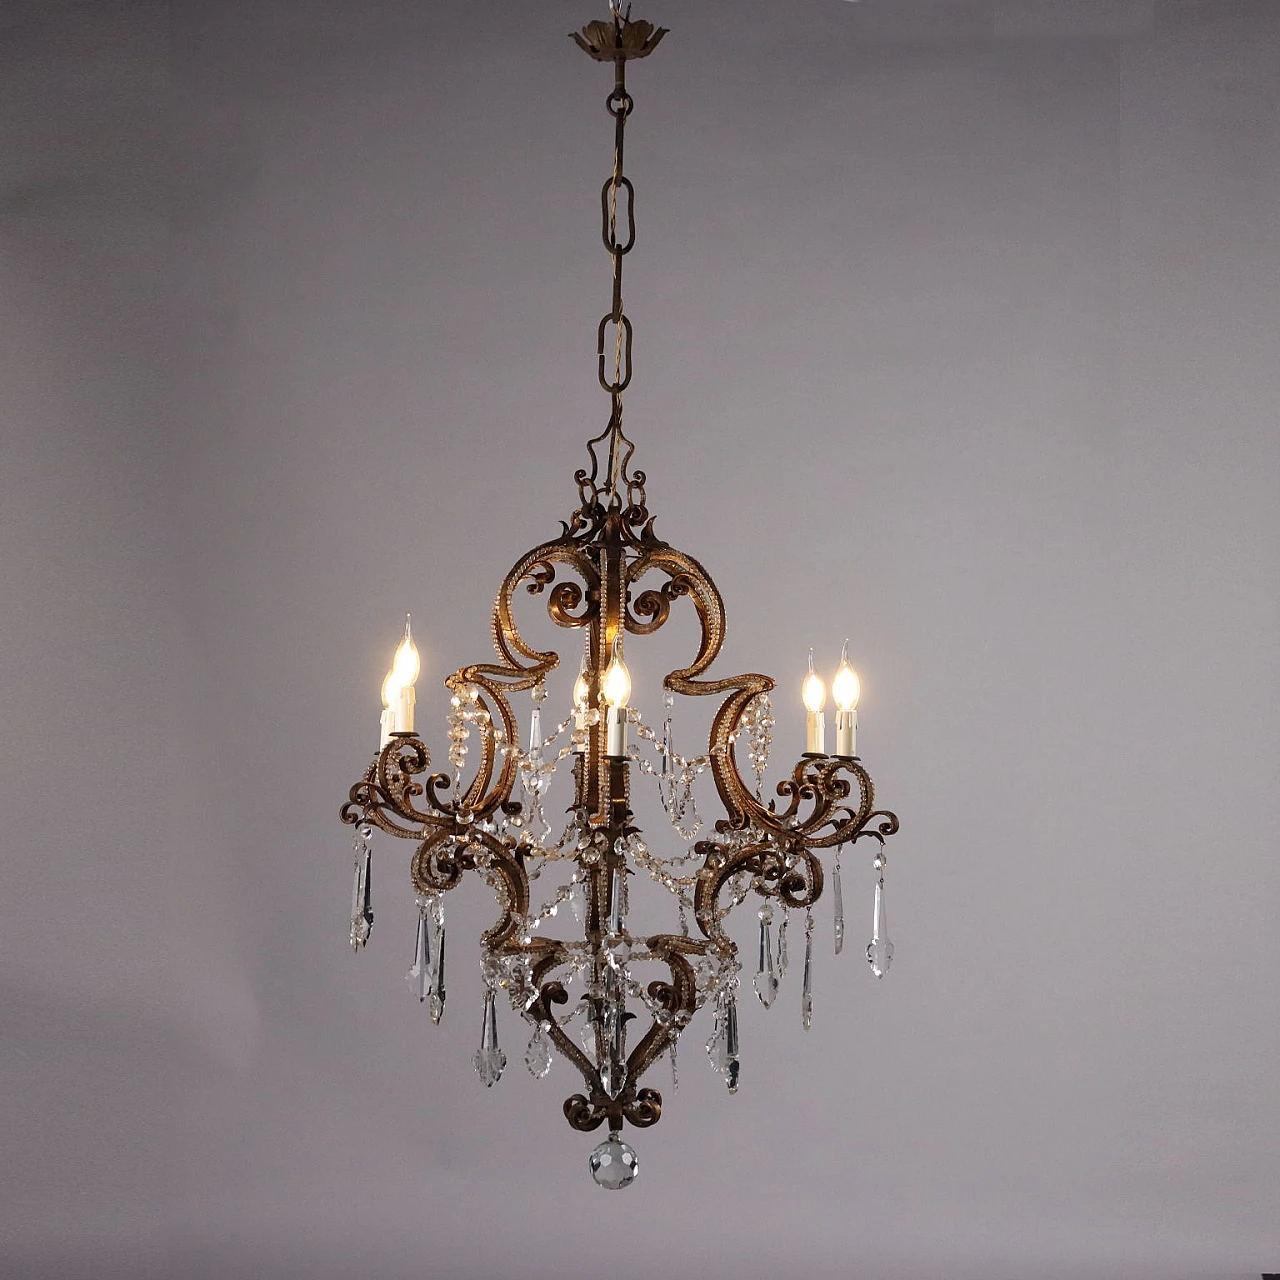 Six-light gilded wrought iron & glass chandelier, 19th century 1